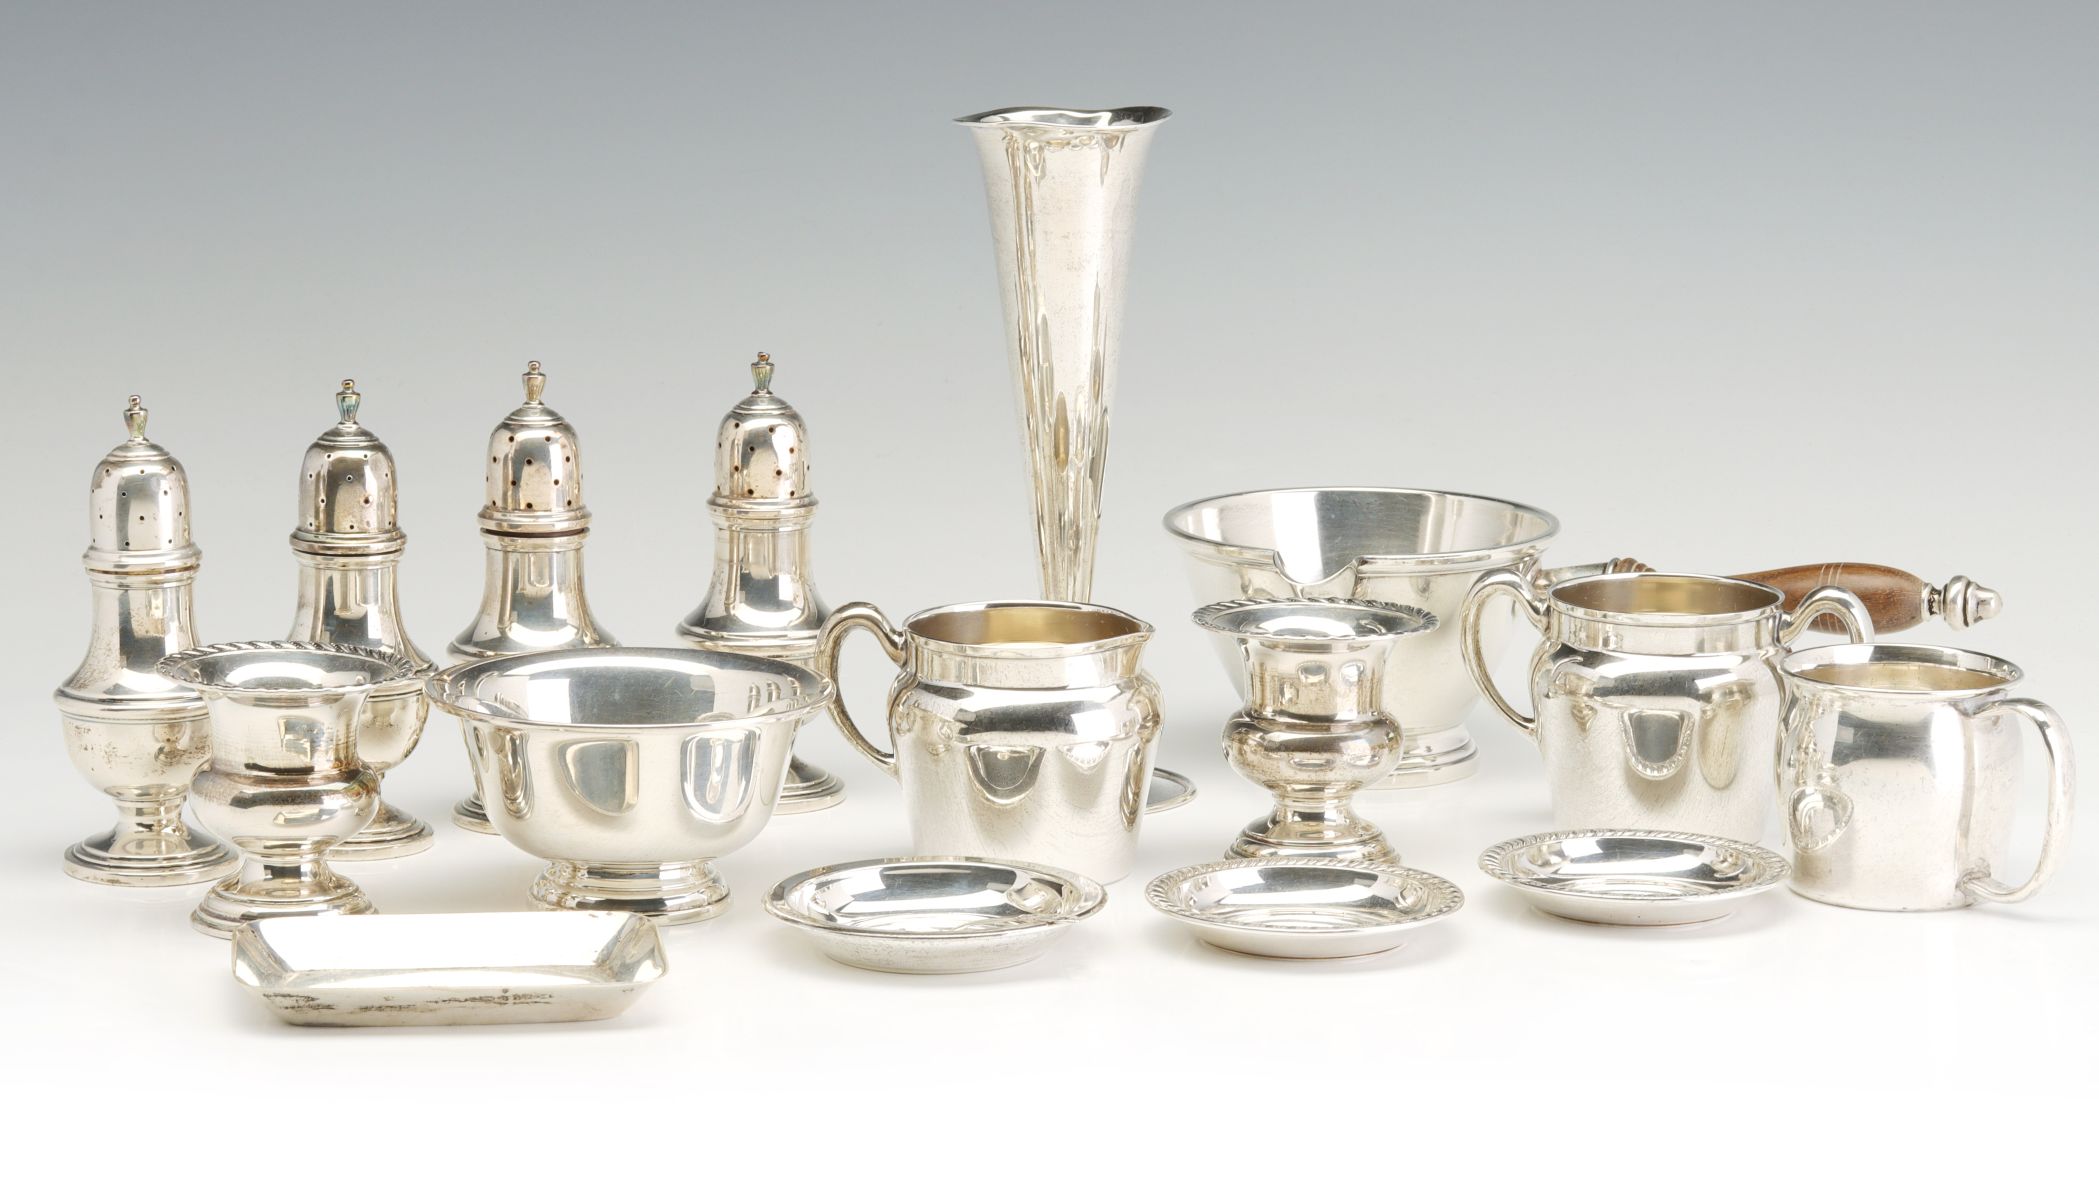 A COLLECTION OF SIXTEEN STERLING SILVER TABLEWARE